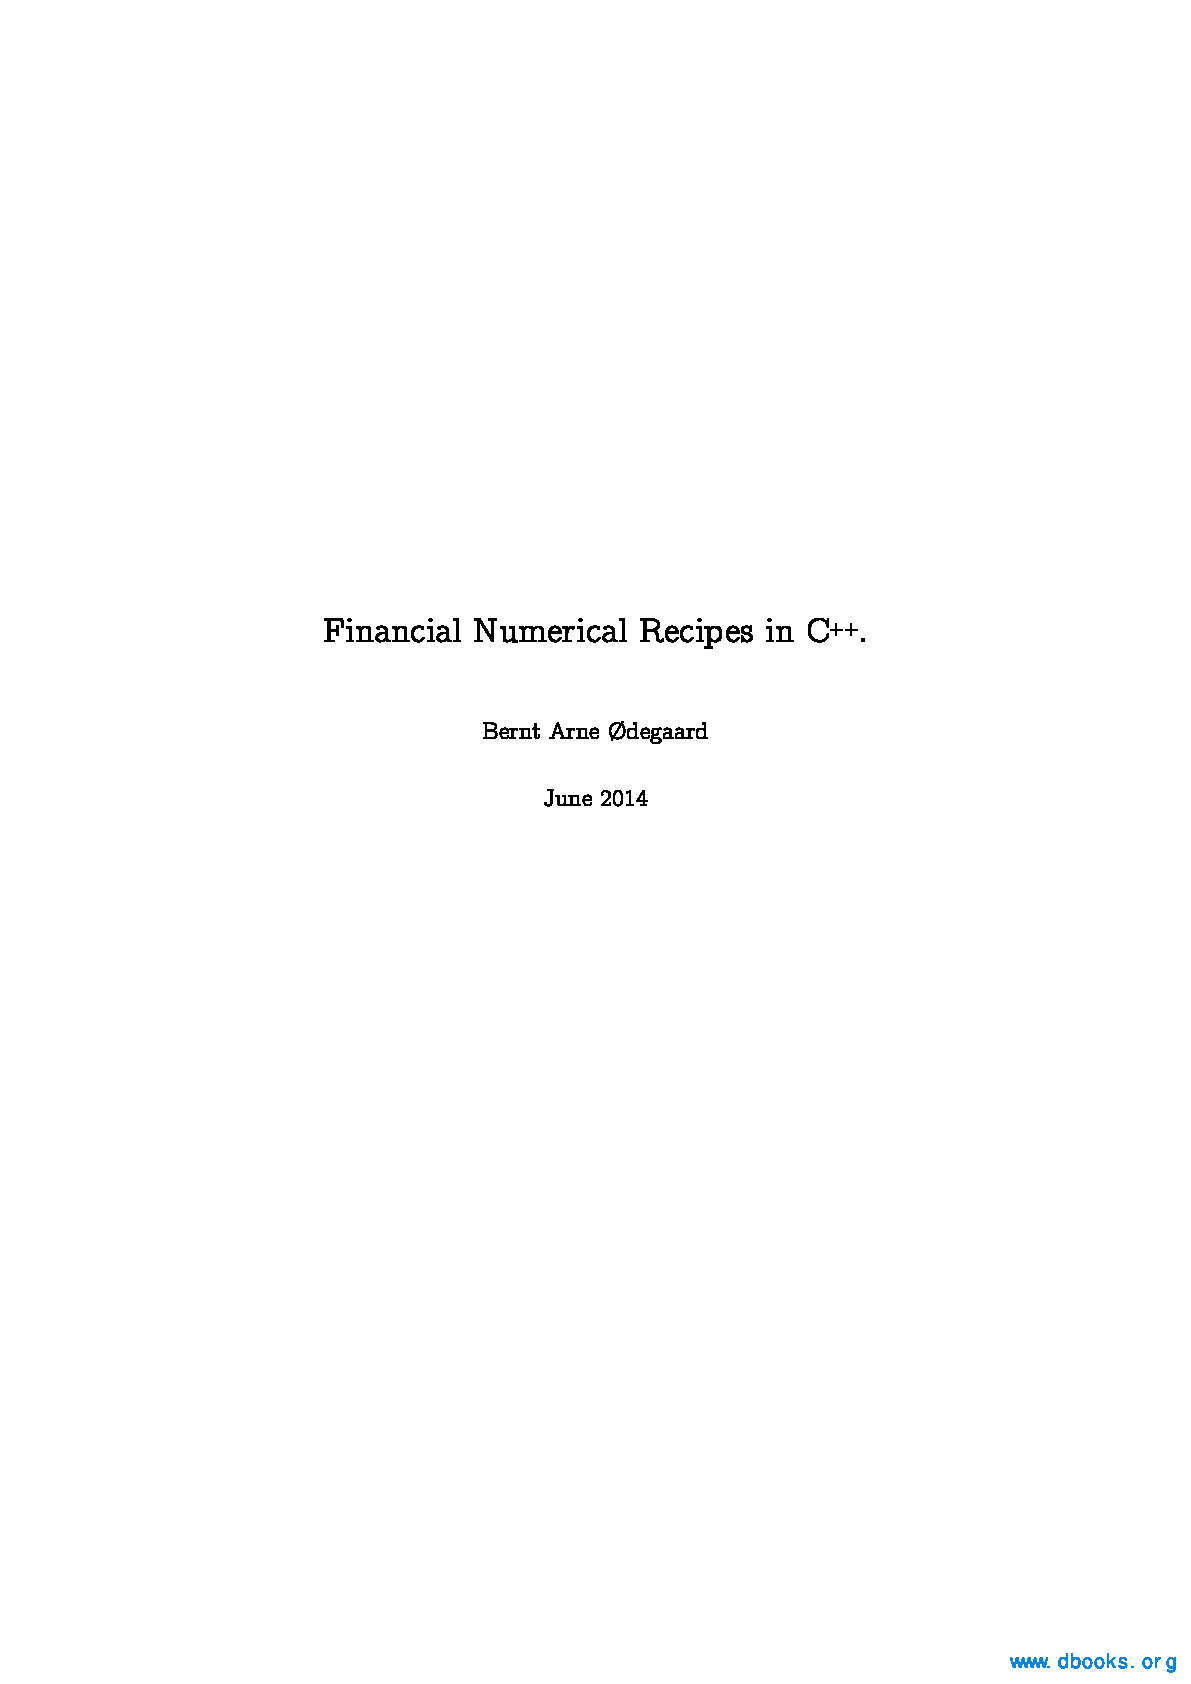 Financial Numerical Recipes in C